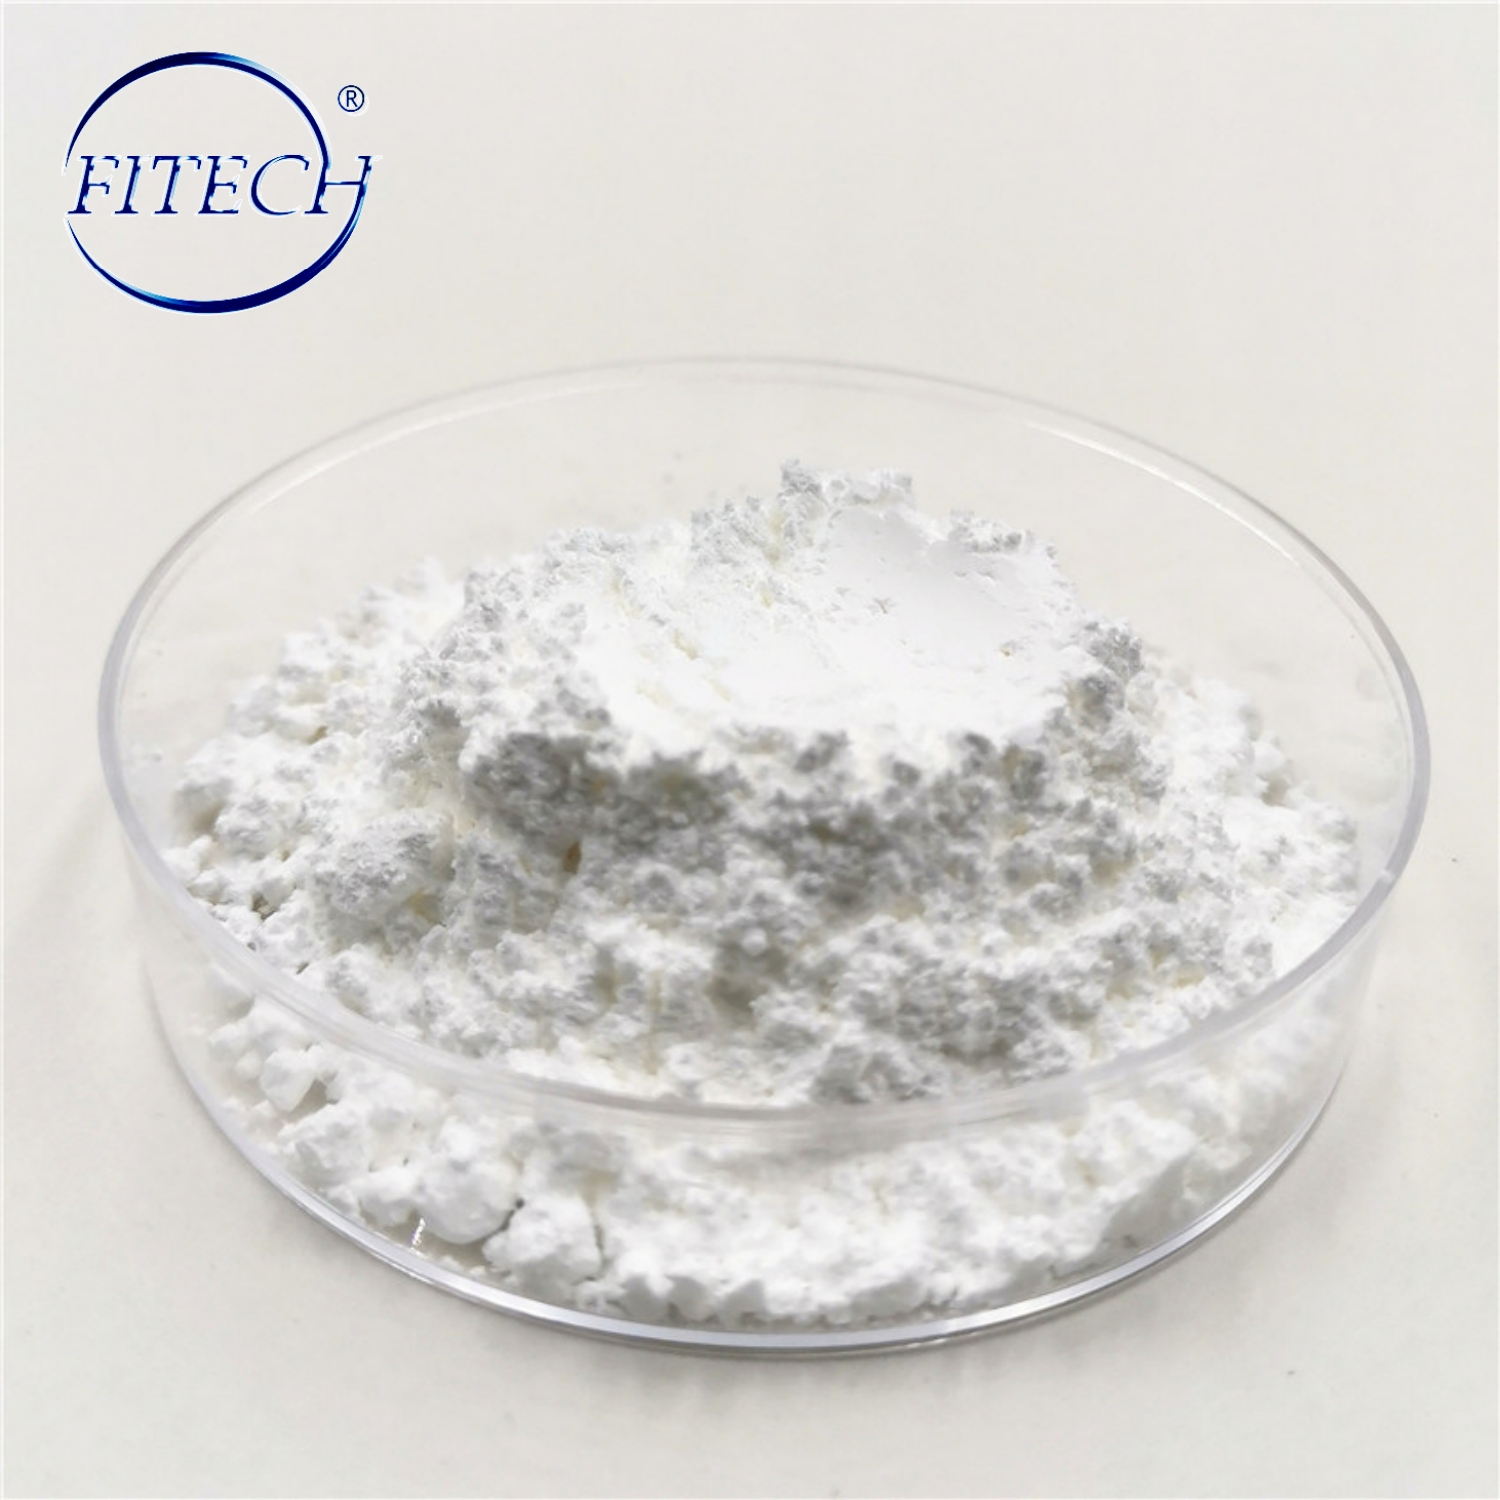 Best Price Supply Chemical Supply Chemical CAS. 10025-82-8 Indium Trichloride